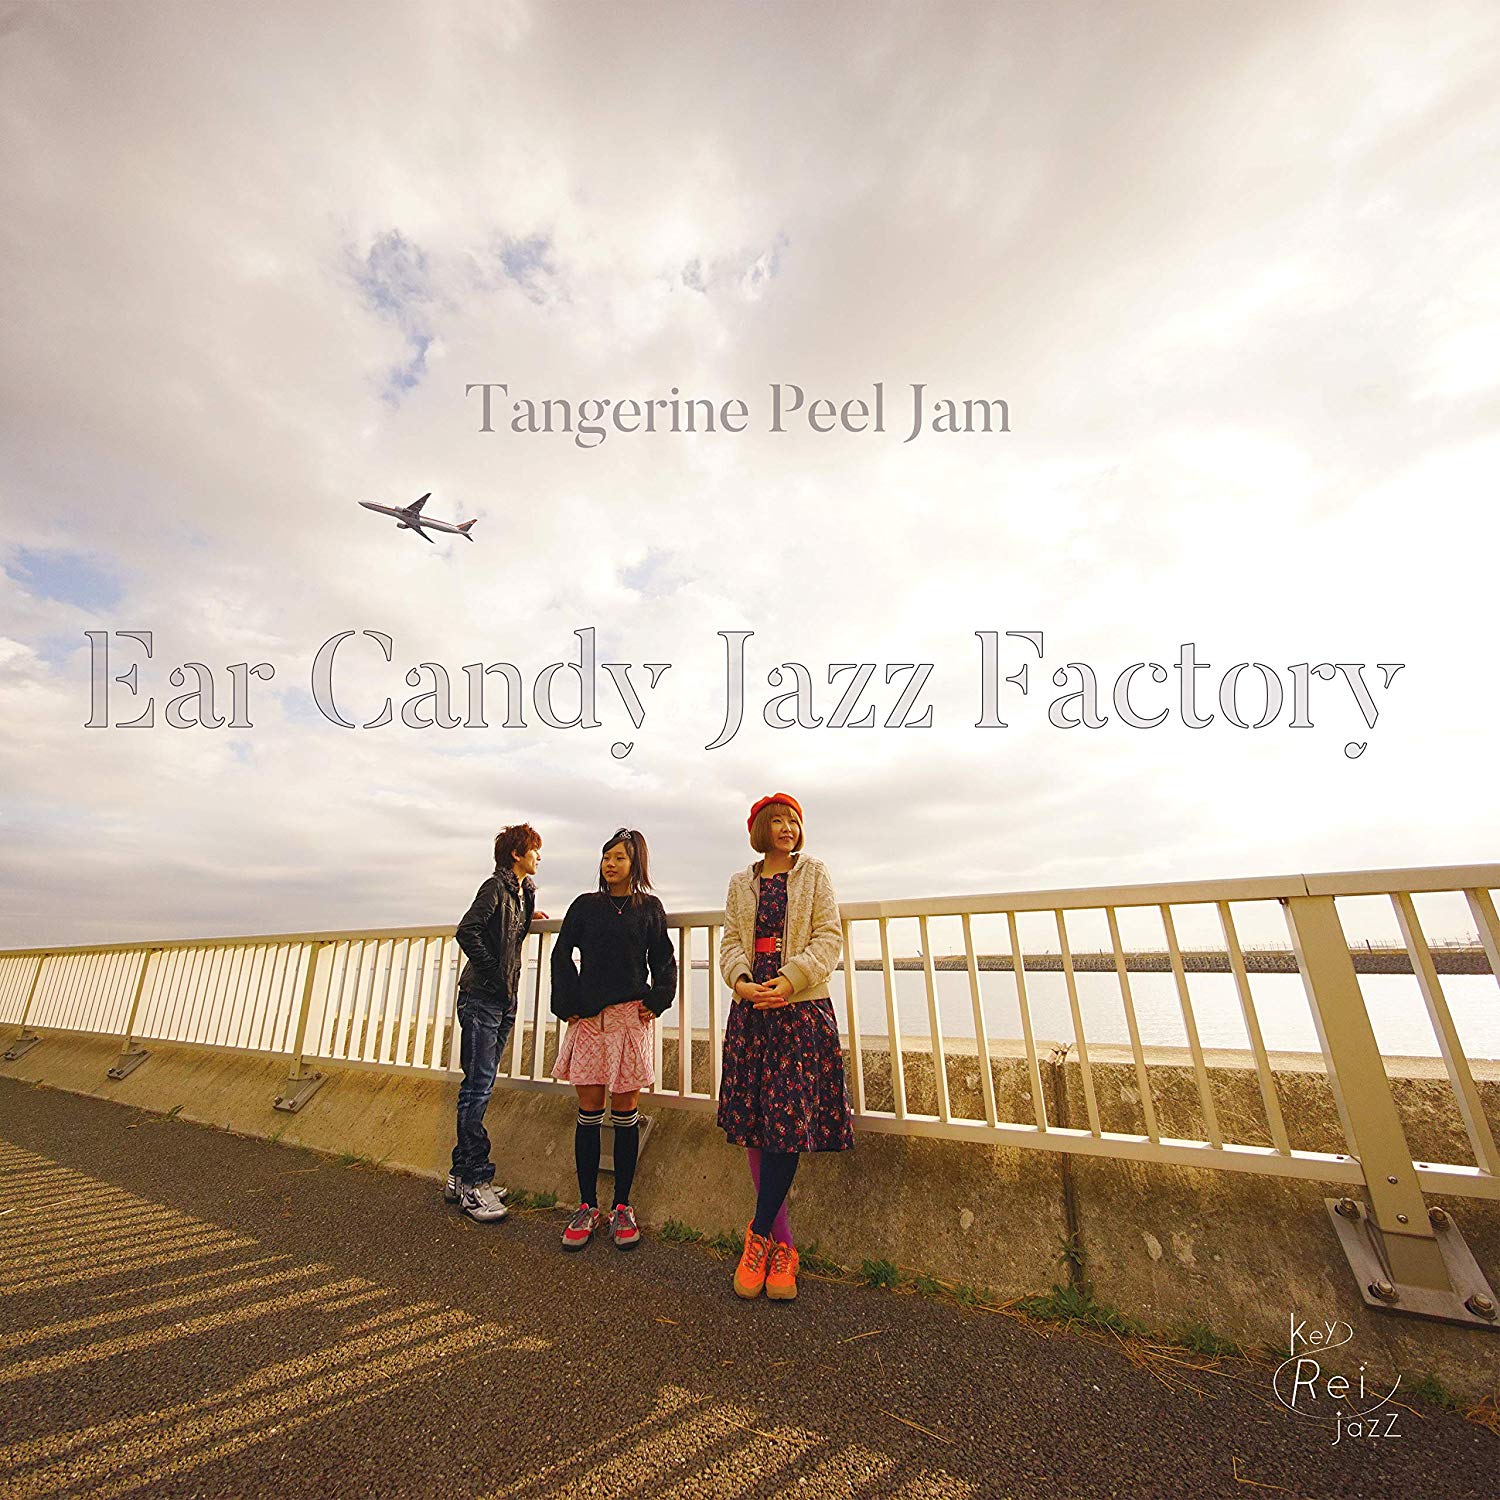 Ear Candy Jazz Factory フルアルバム 完成！の記事より